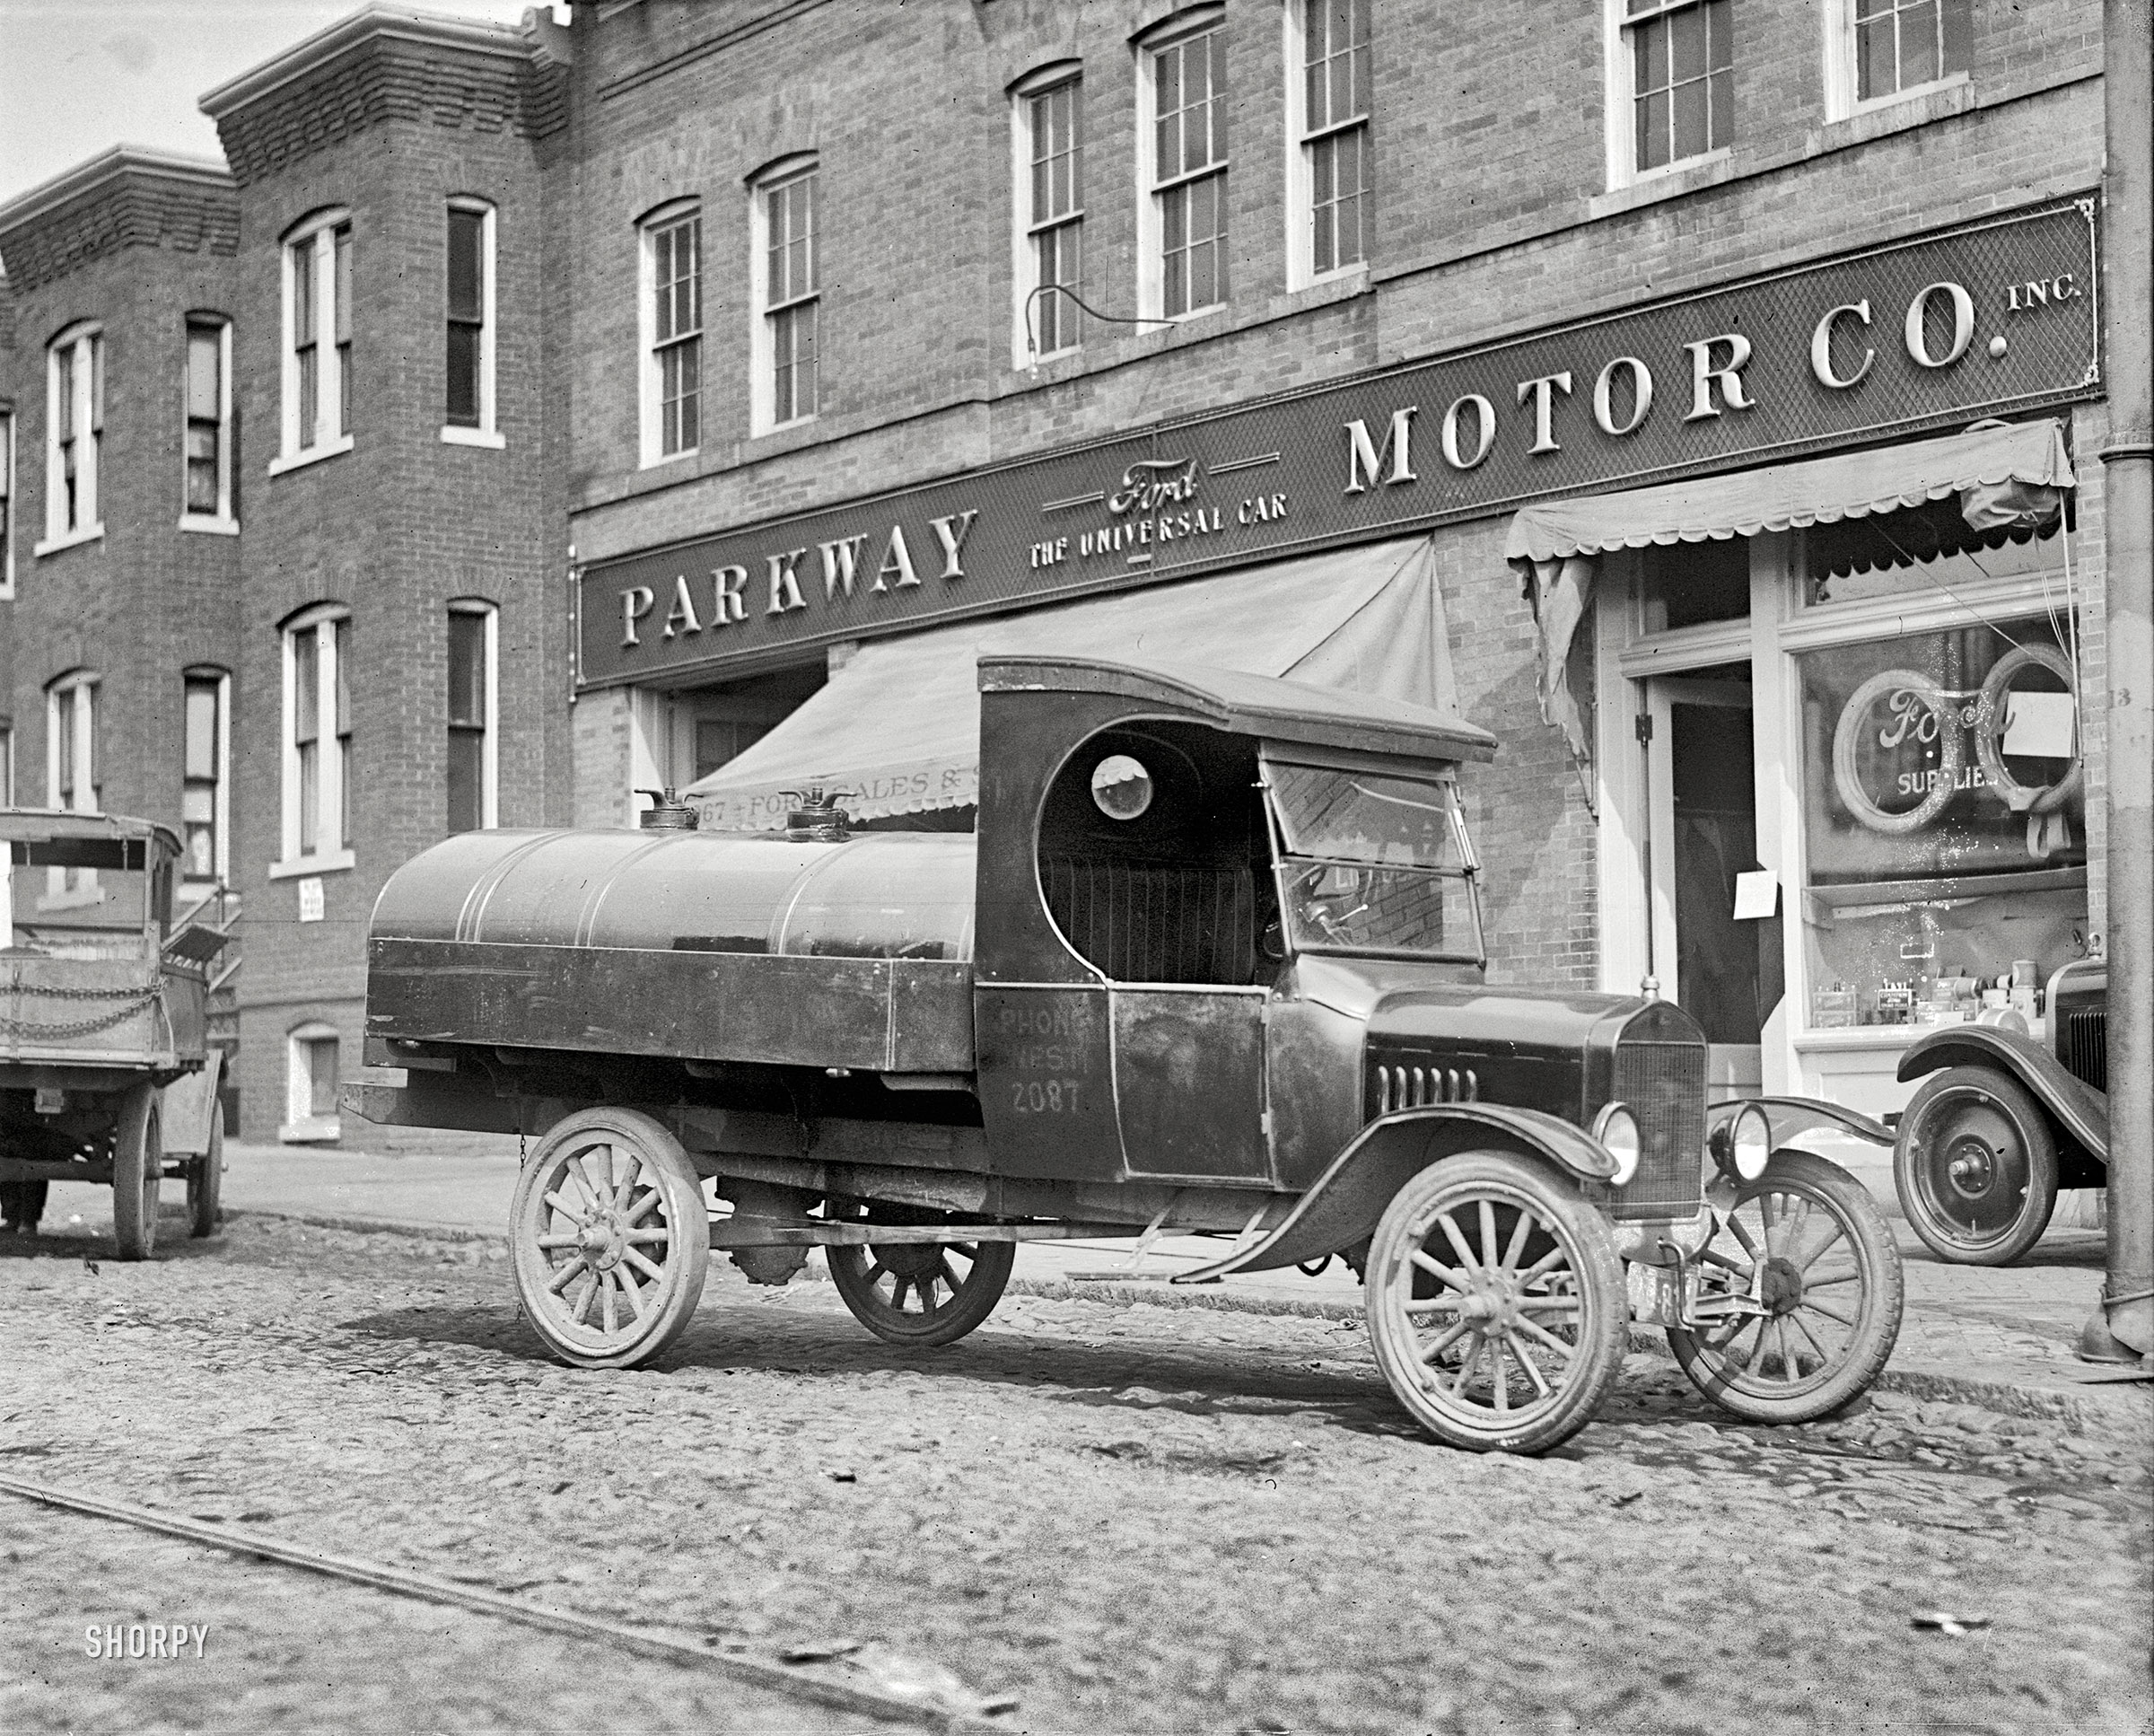 Washington, D.C., 1925. "Parkway Motor Co. -- Ford truck." National Photo Company Collection glass negative. View full size.